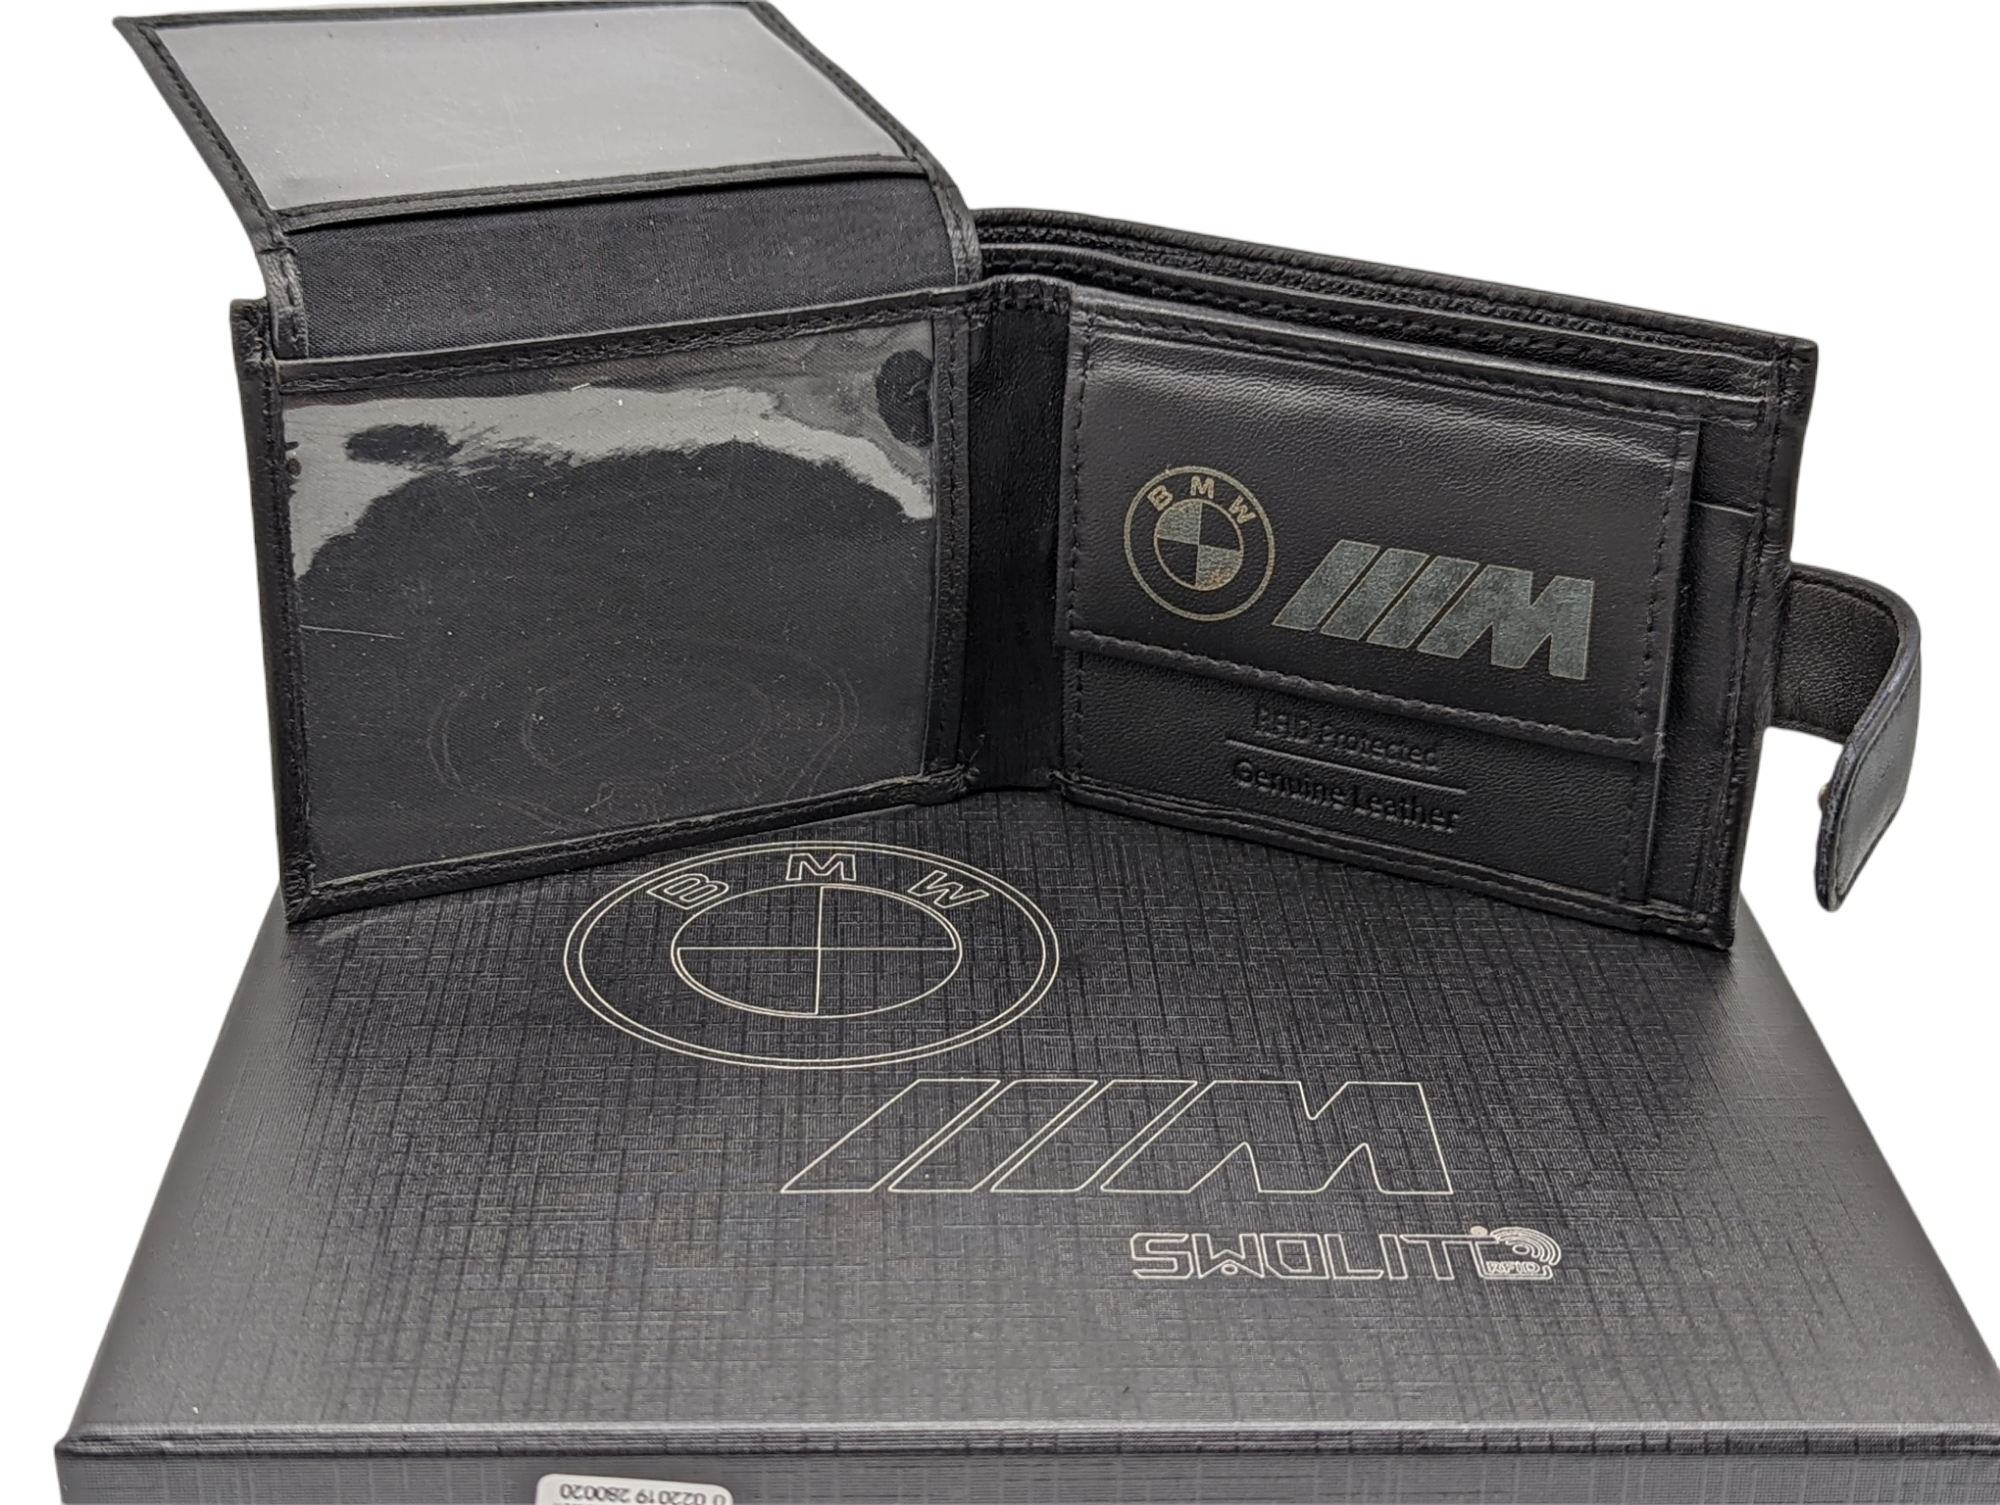 Elite Genuine Leather BMW M Sport Wallet, Key Fob, Pen Boxed Gift Set Gift Boxed VERY LOW STOCK